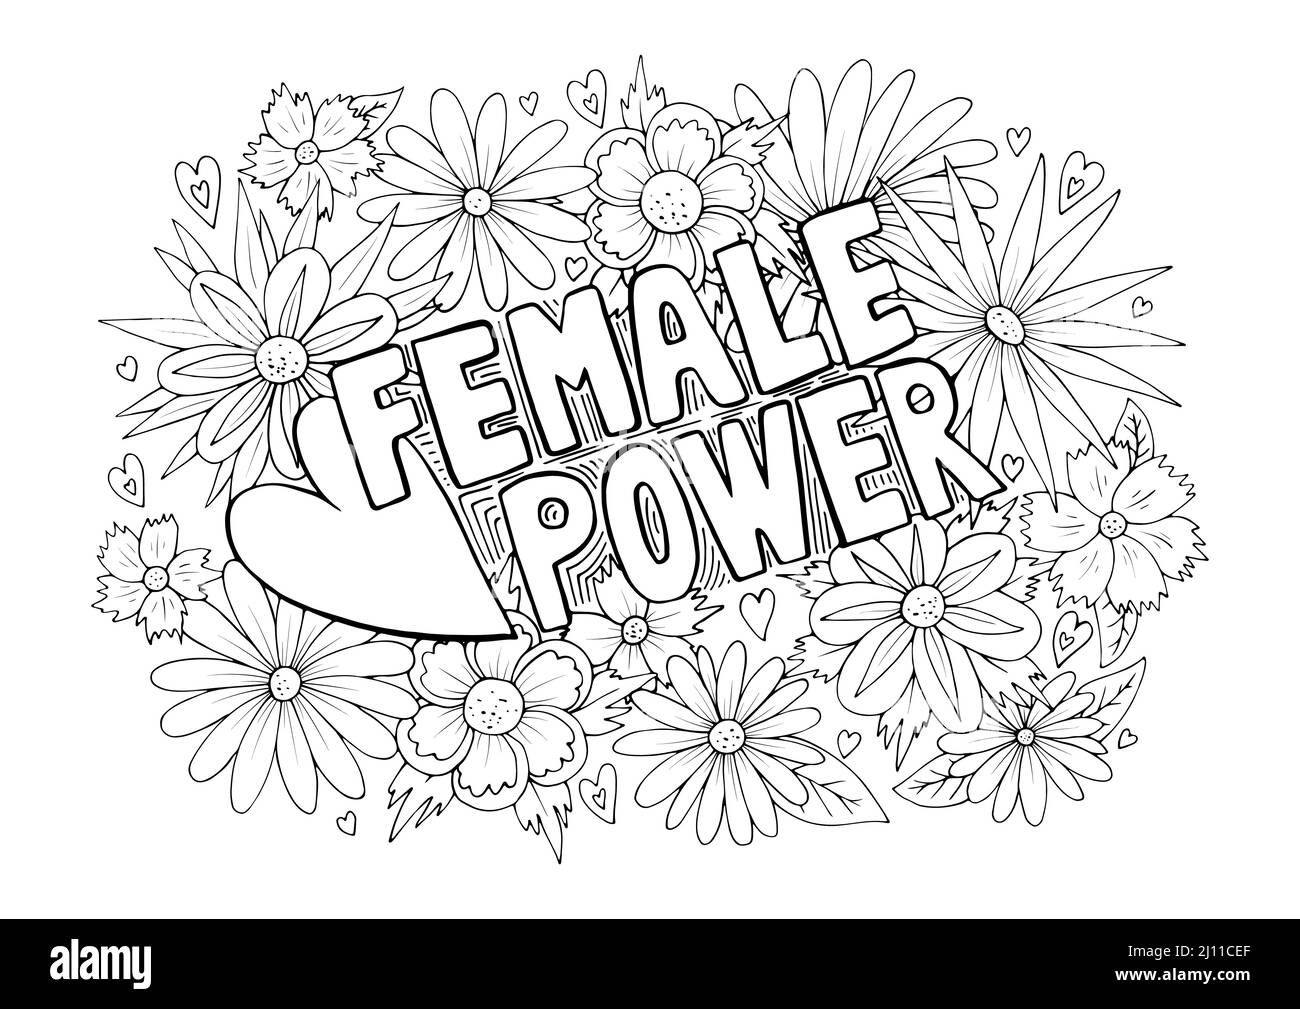 Female Power word in flower pattern, anti stress coloring page design. Girl Power motivation slogan. Feminist saying Stock Vector